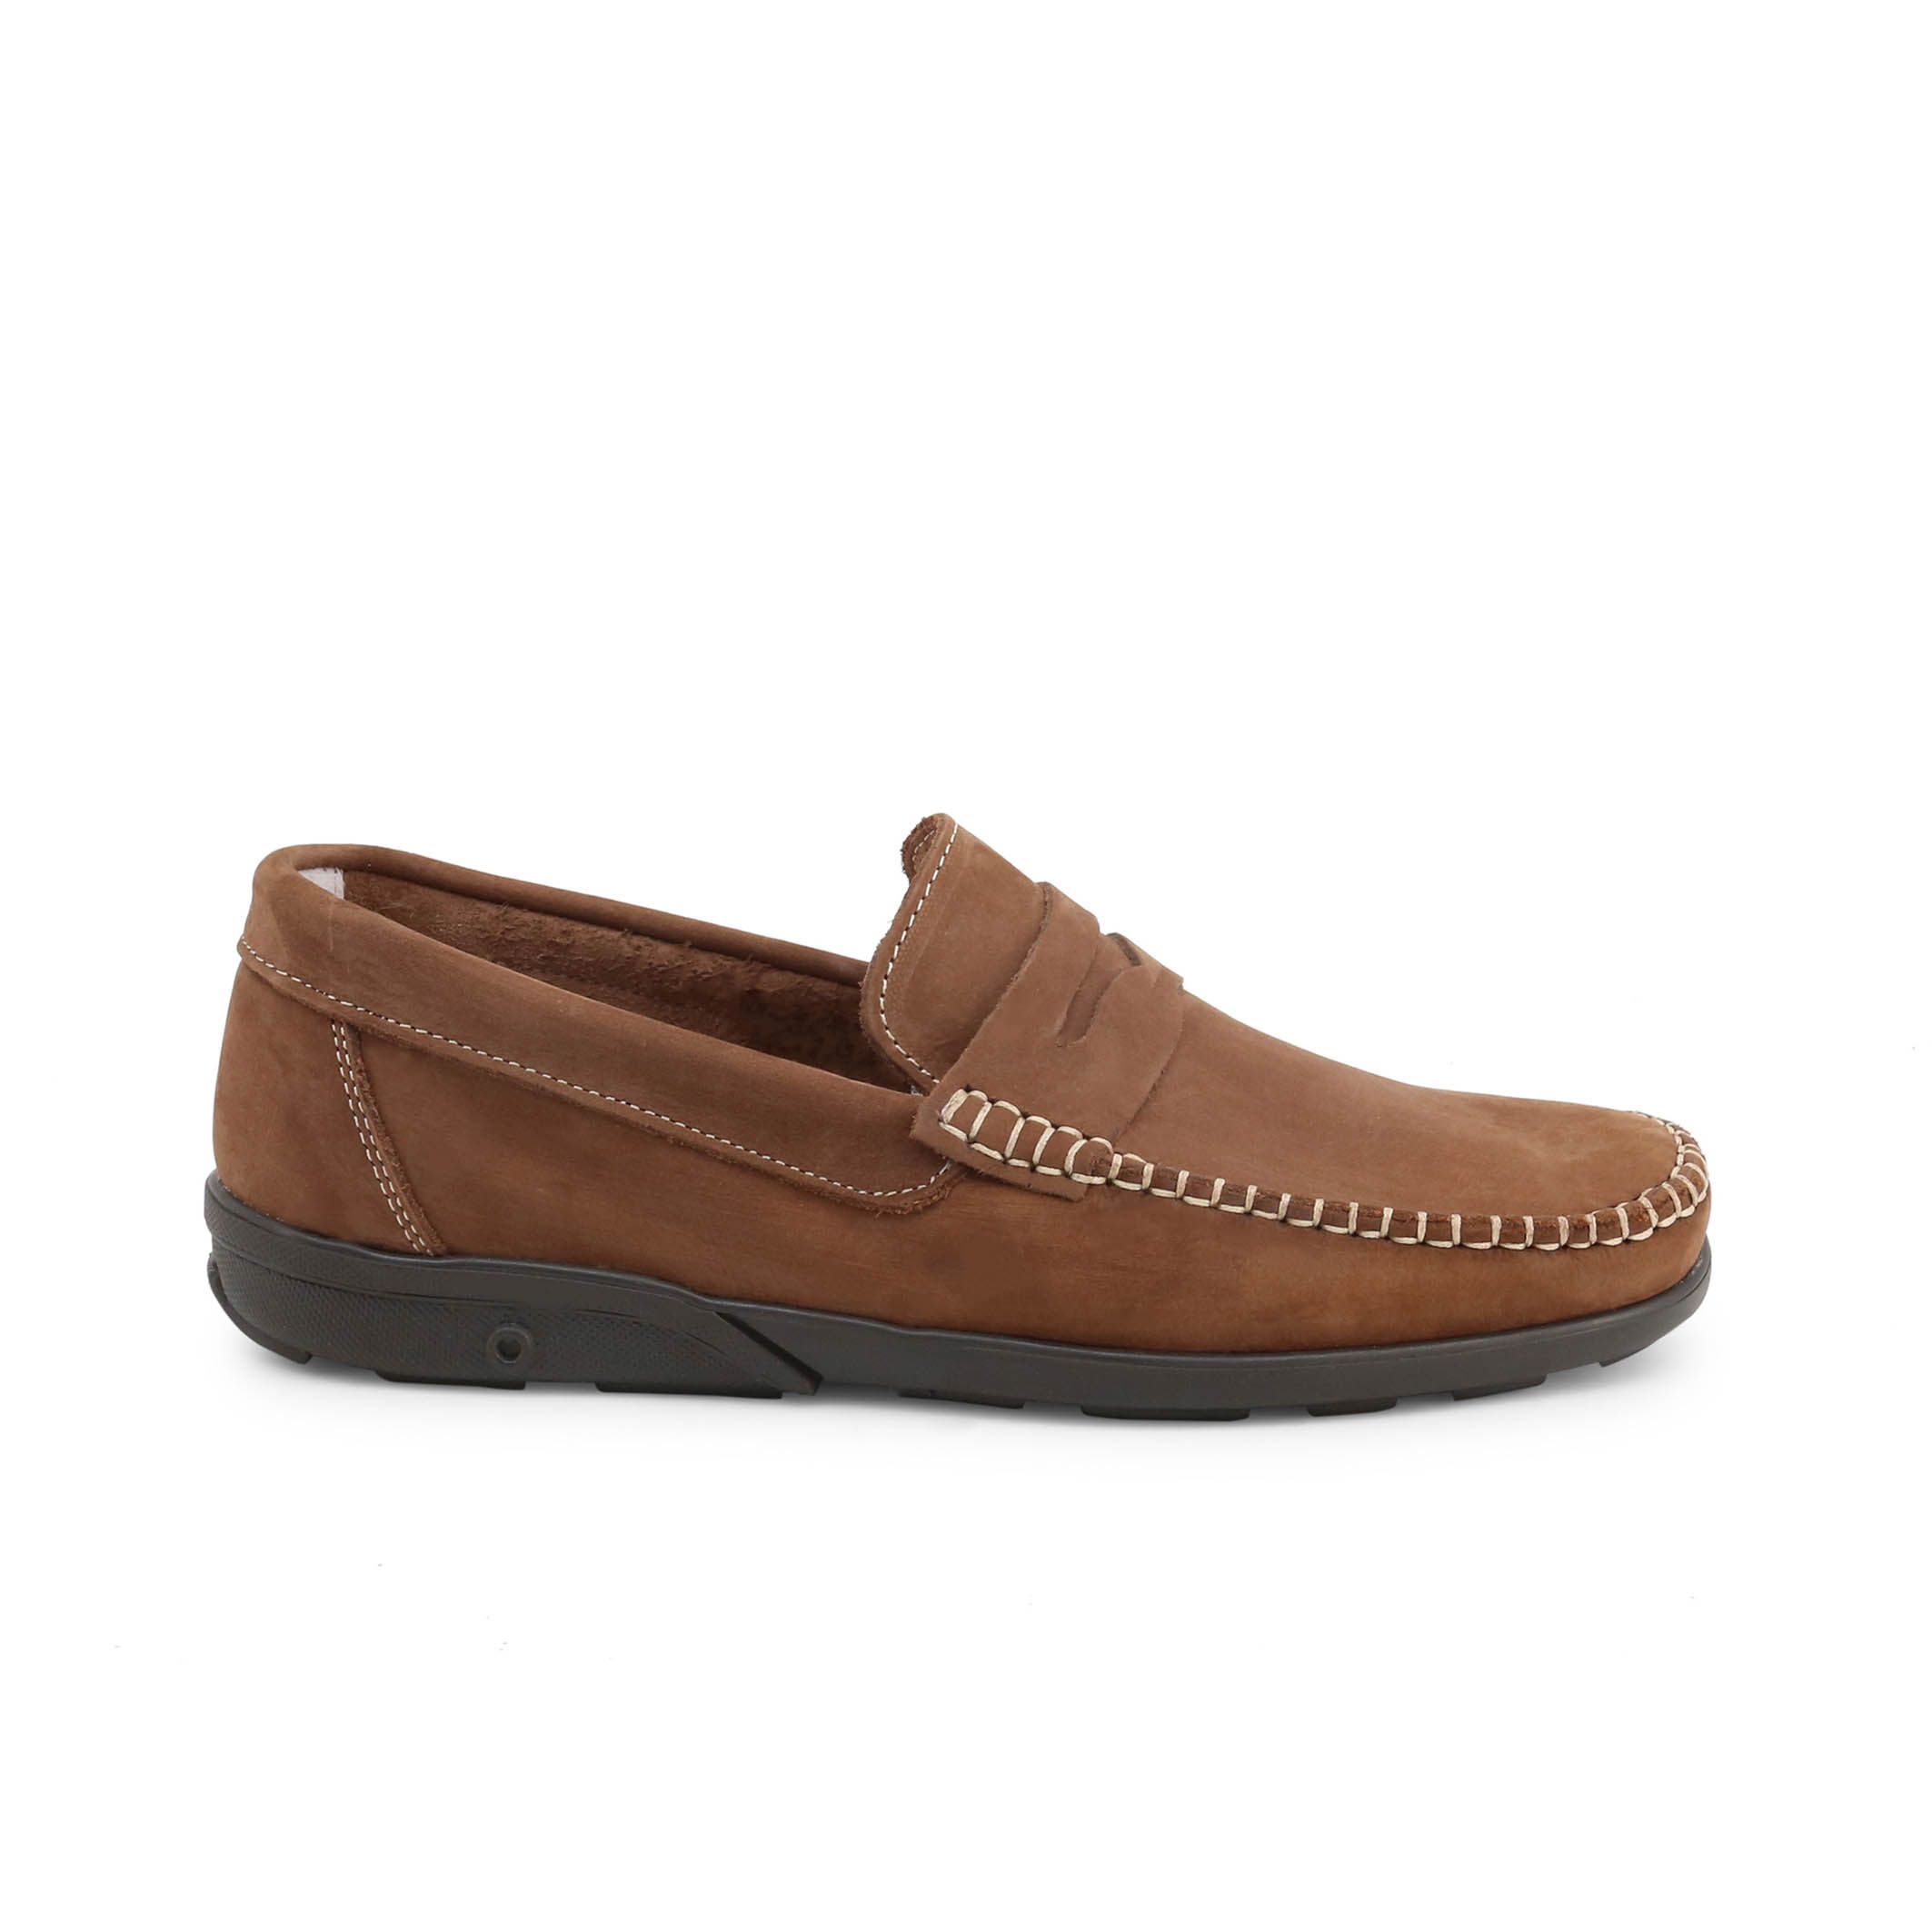 Made in: Italy <br> Gender: Man <br> Type: Loafers <br> Upper: leather <br> Internal lining: leather <br> Sole: rubber <br> Details: square toe